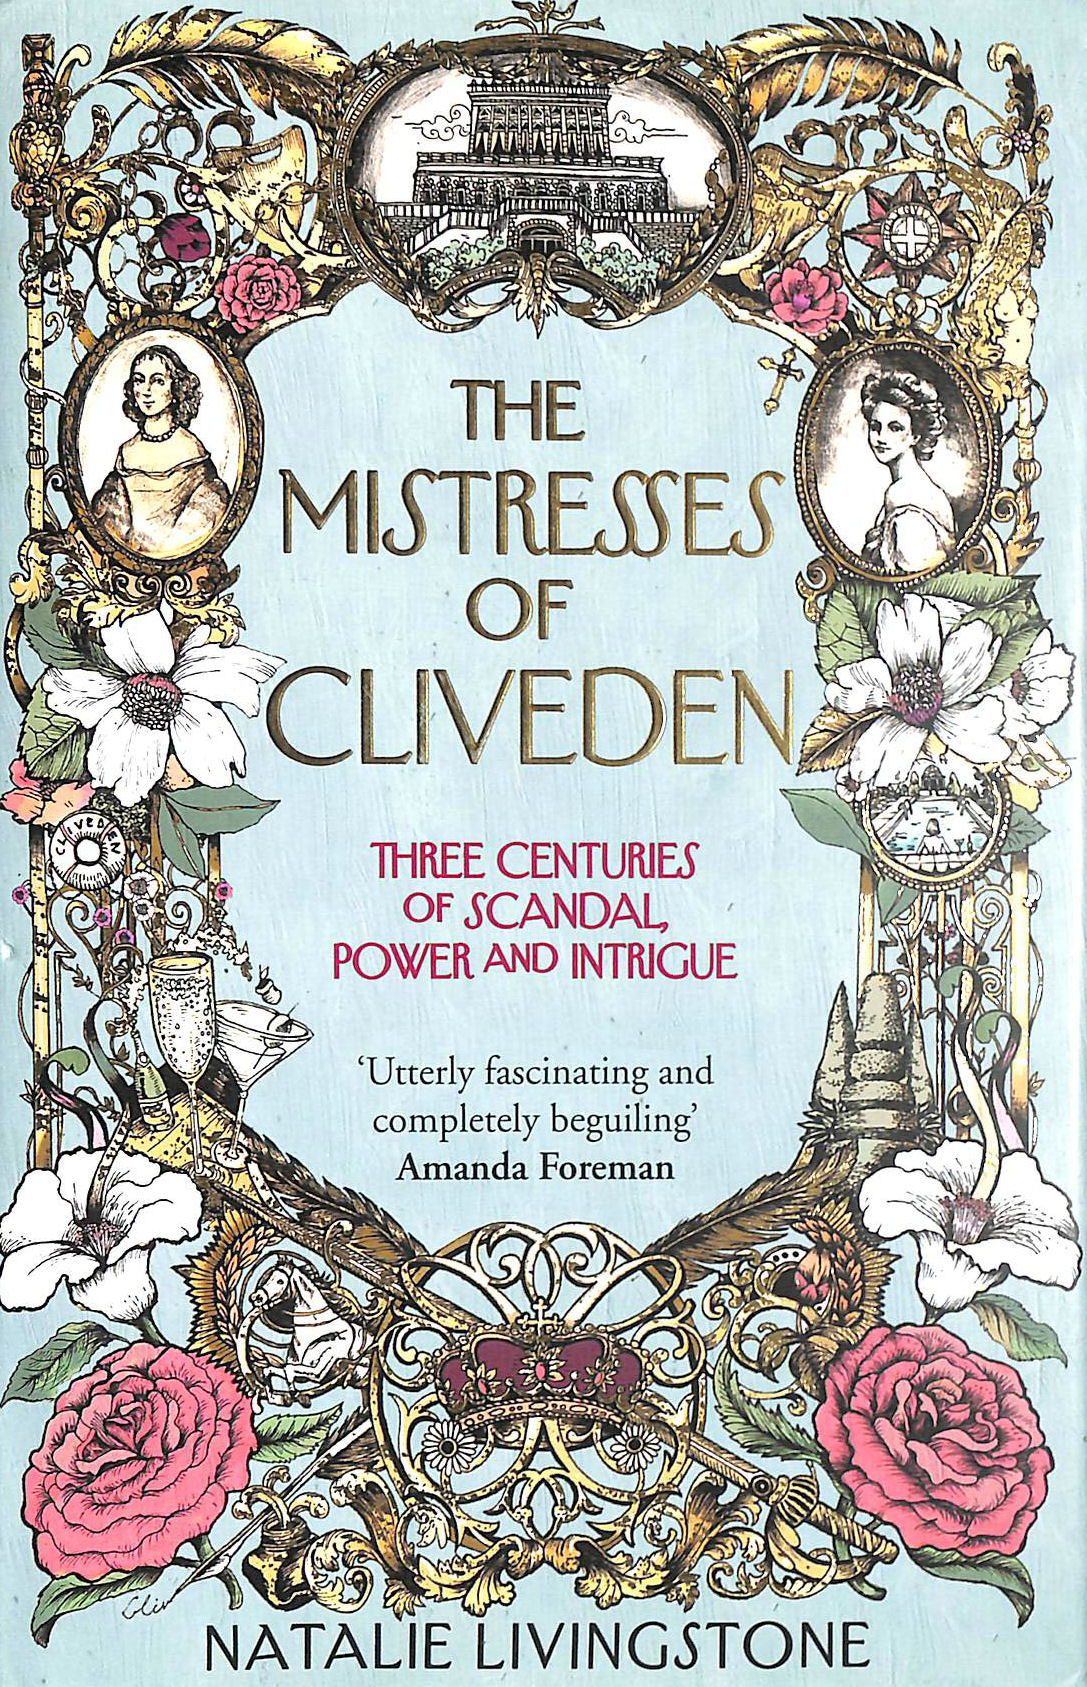 LIVINGSTONE, NATALIE - The Mistresses of Cliveden: Three Centuries of Scandal, Power and Intrigue in an English Stately Home